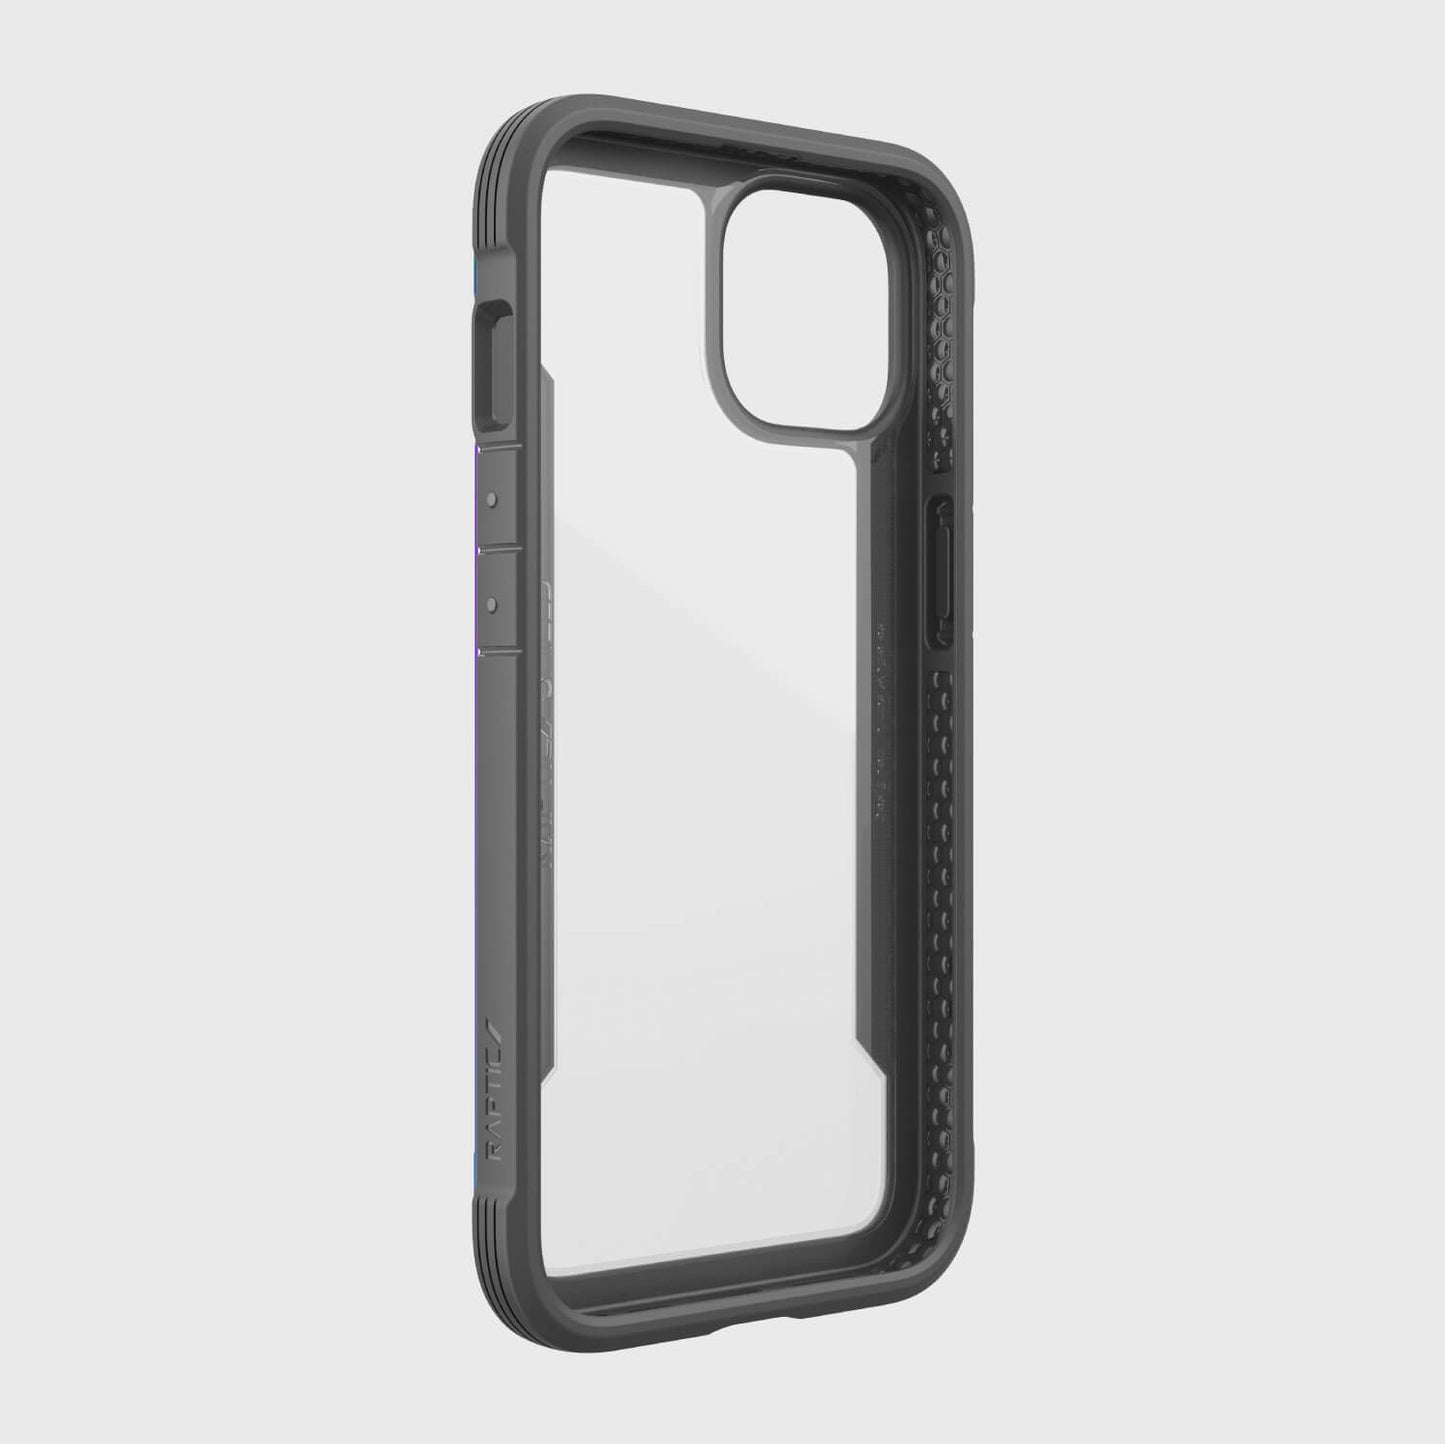 The iPhone 14 Case - Shield, featuring Military Grade Drop Test protection, is displayed on a clean white background from Raptic.